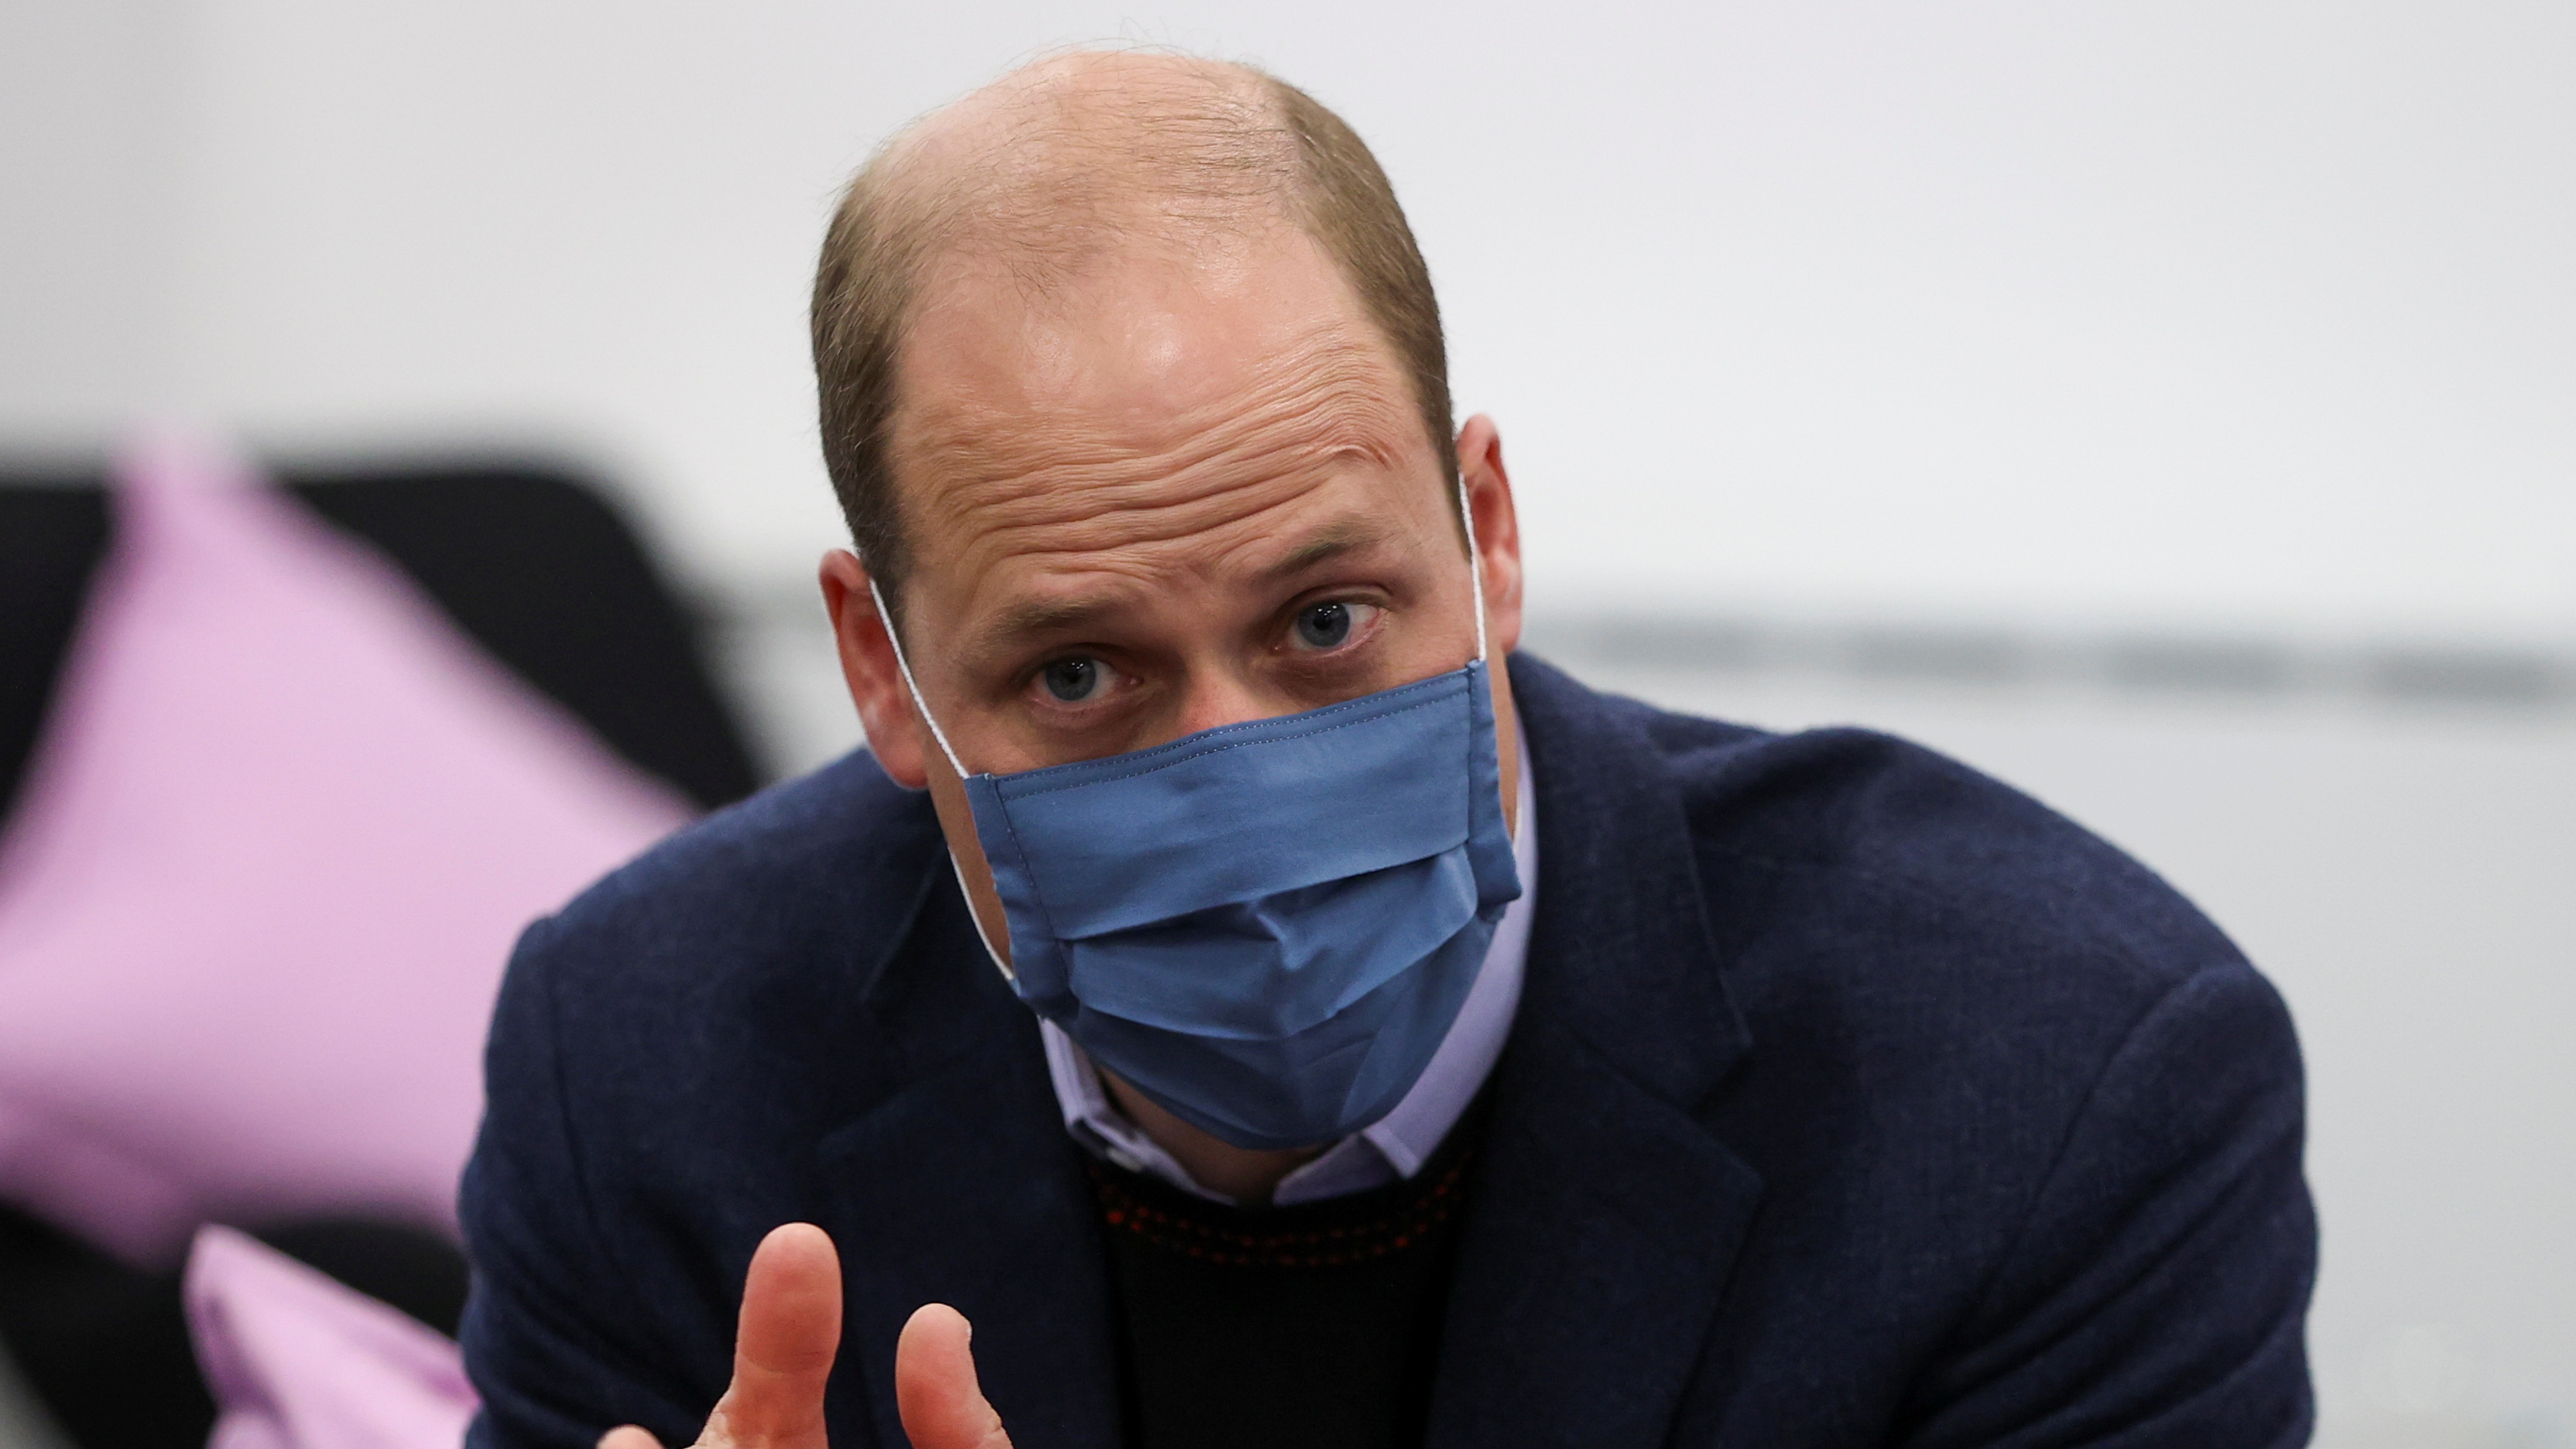 Prince William during a visit to a mental health charity in Wolverhampton